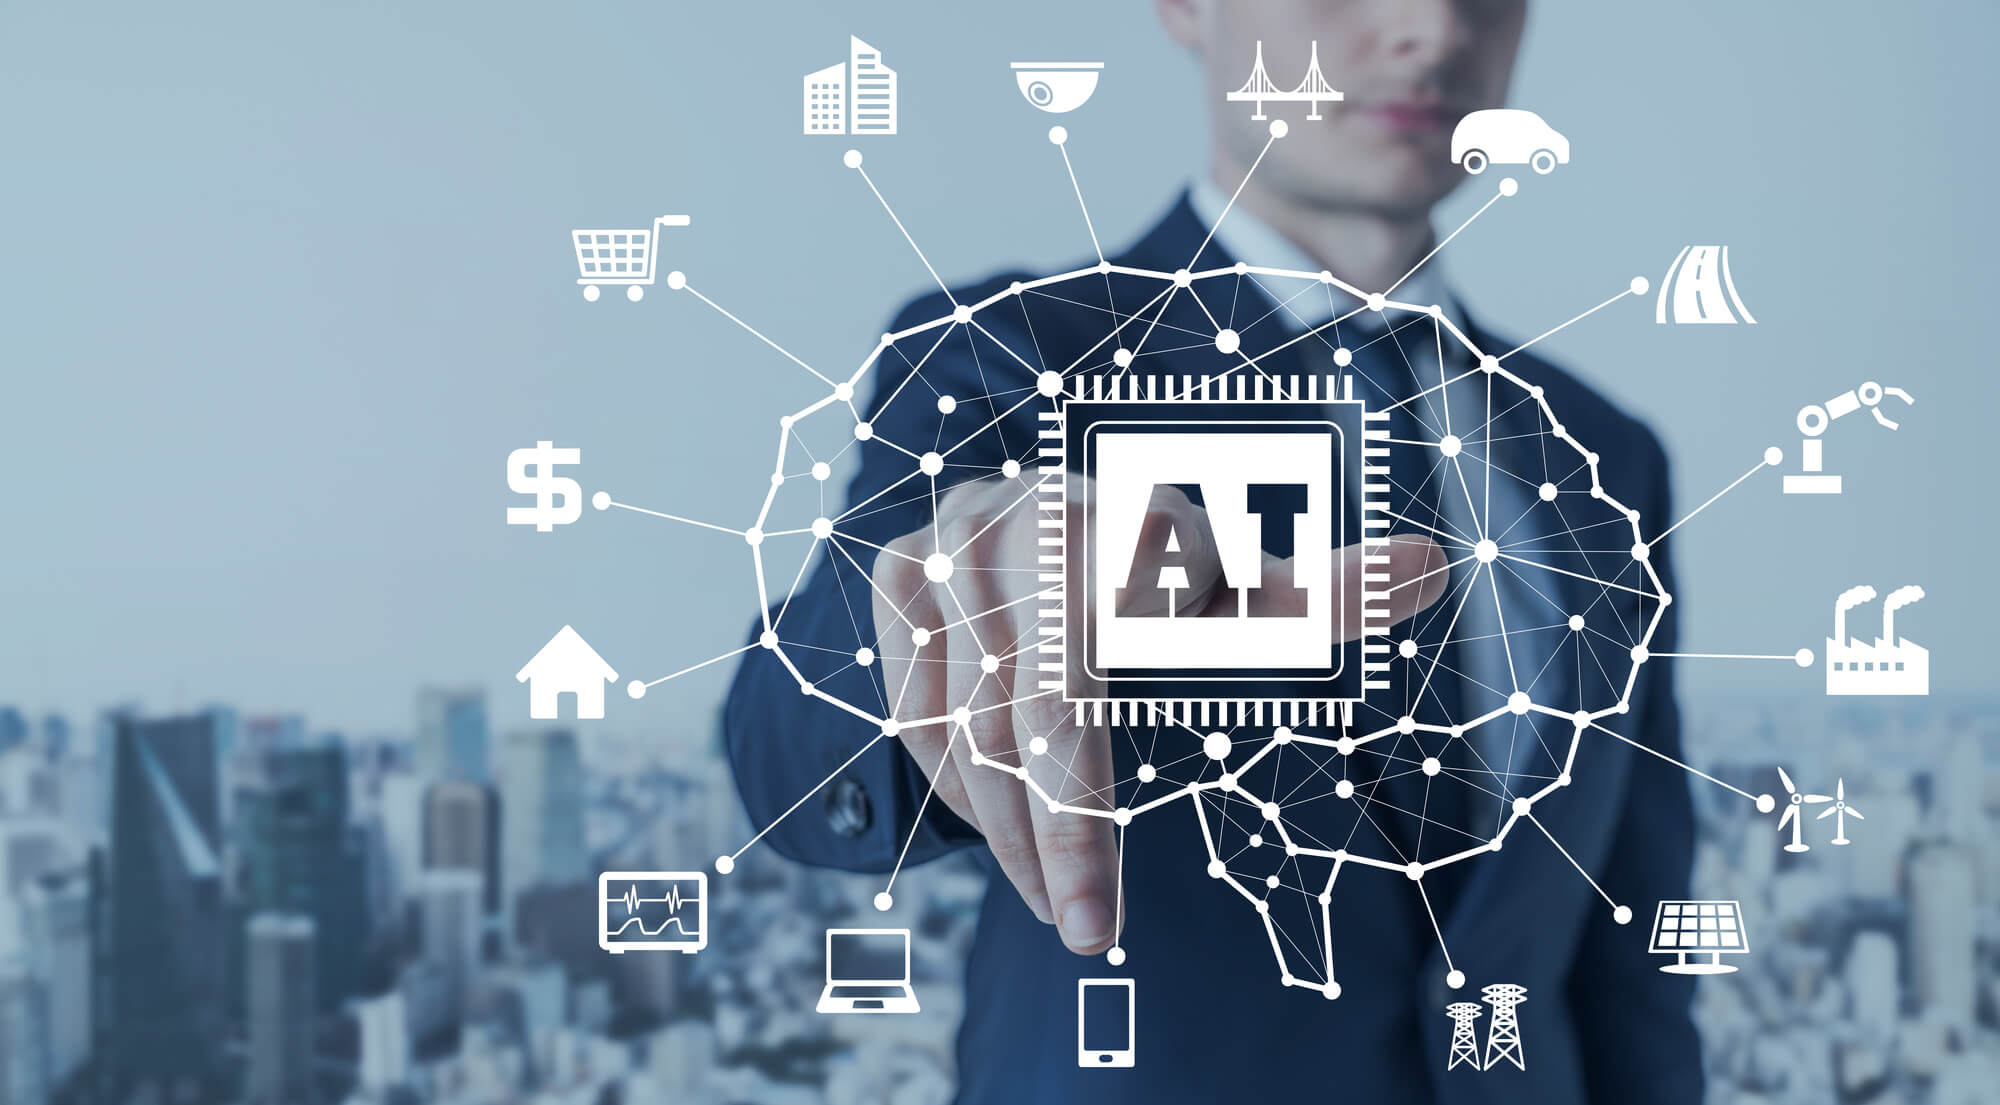 Automation & AI – Network Software & Technologies